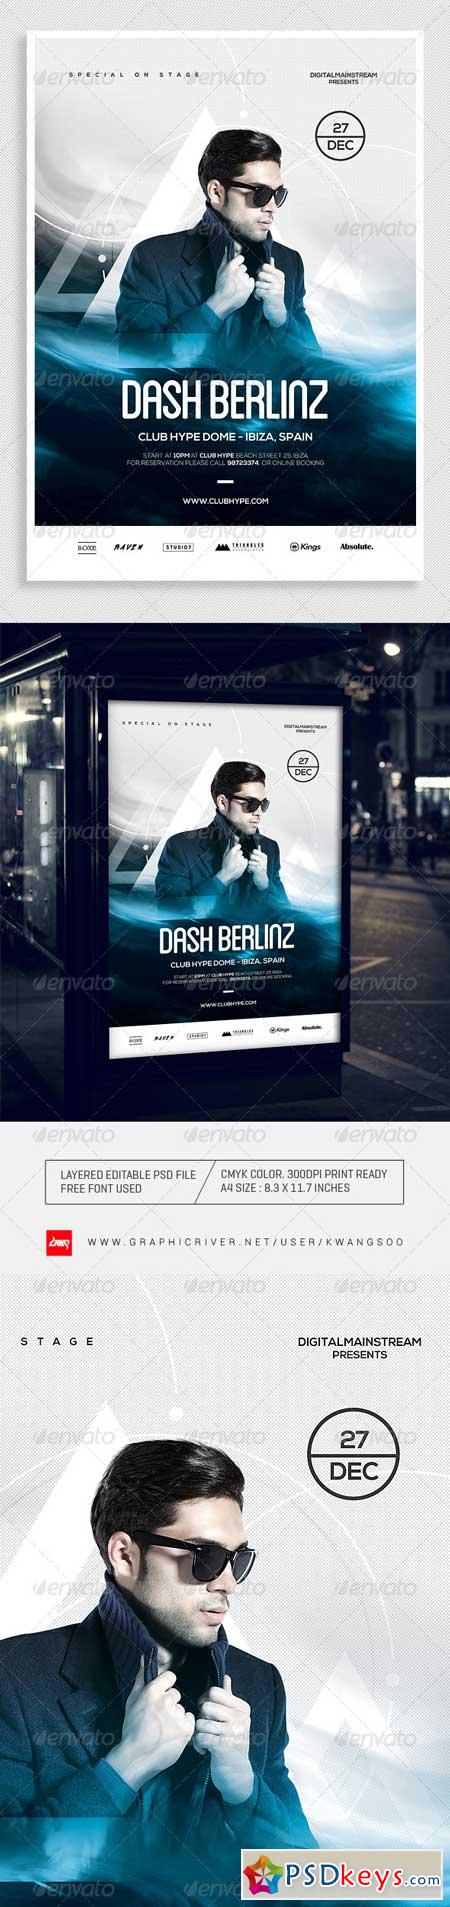 Special Dj Electronic Dance Music Flyer Poster 2 8343845